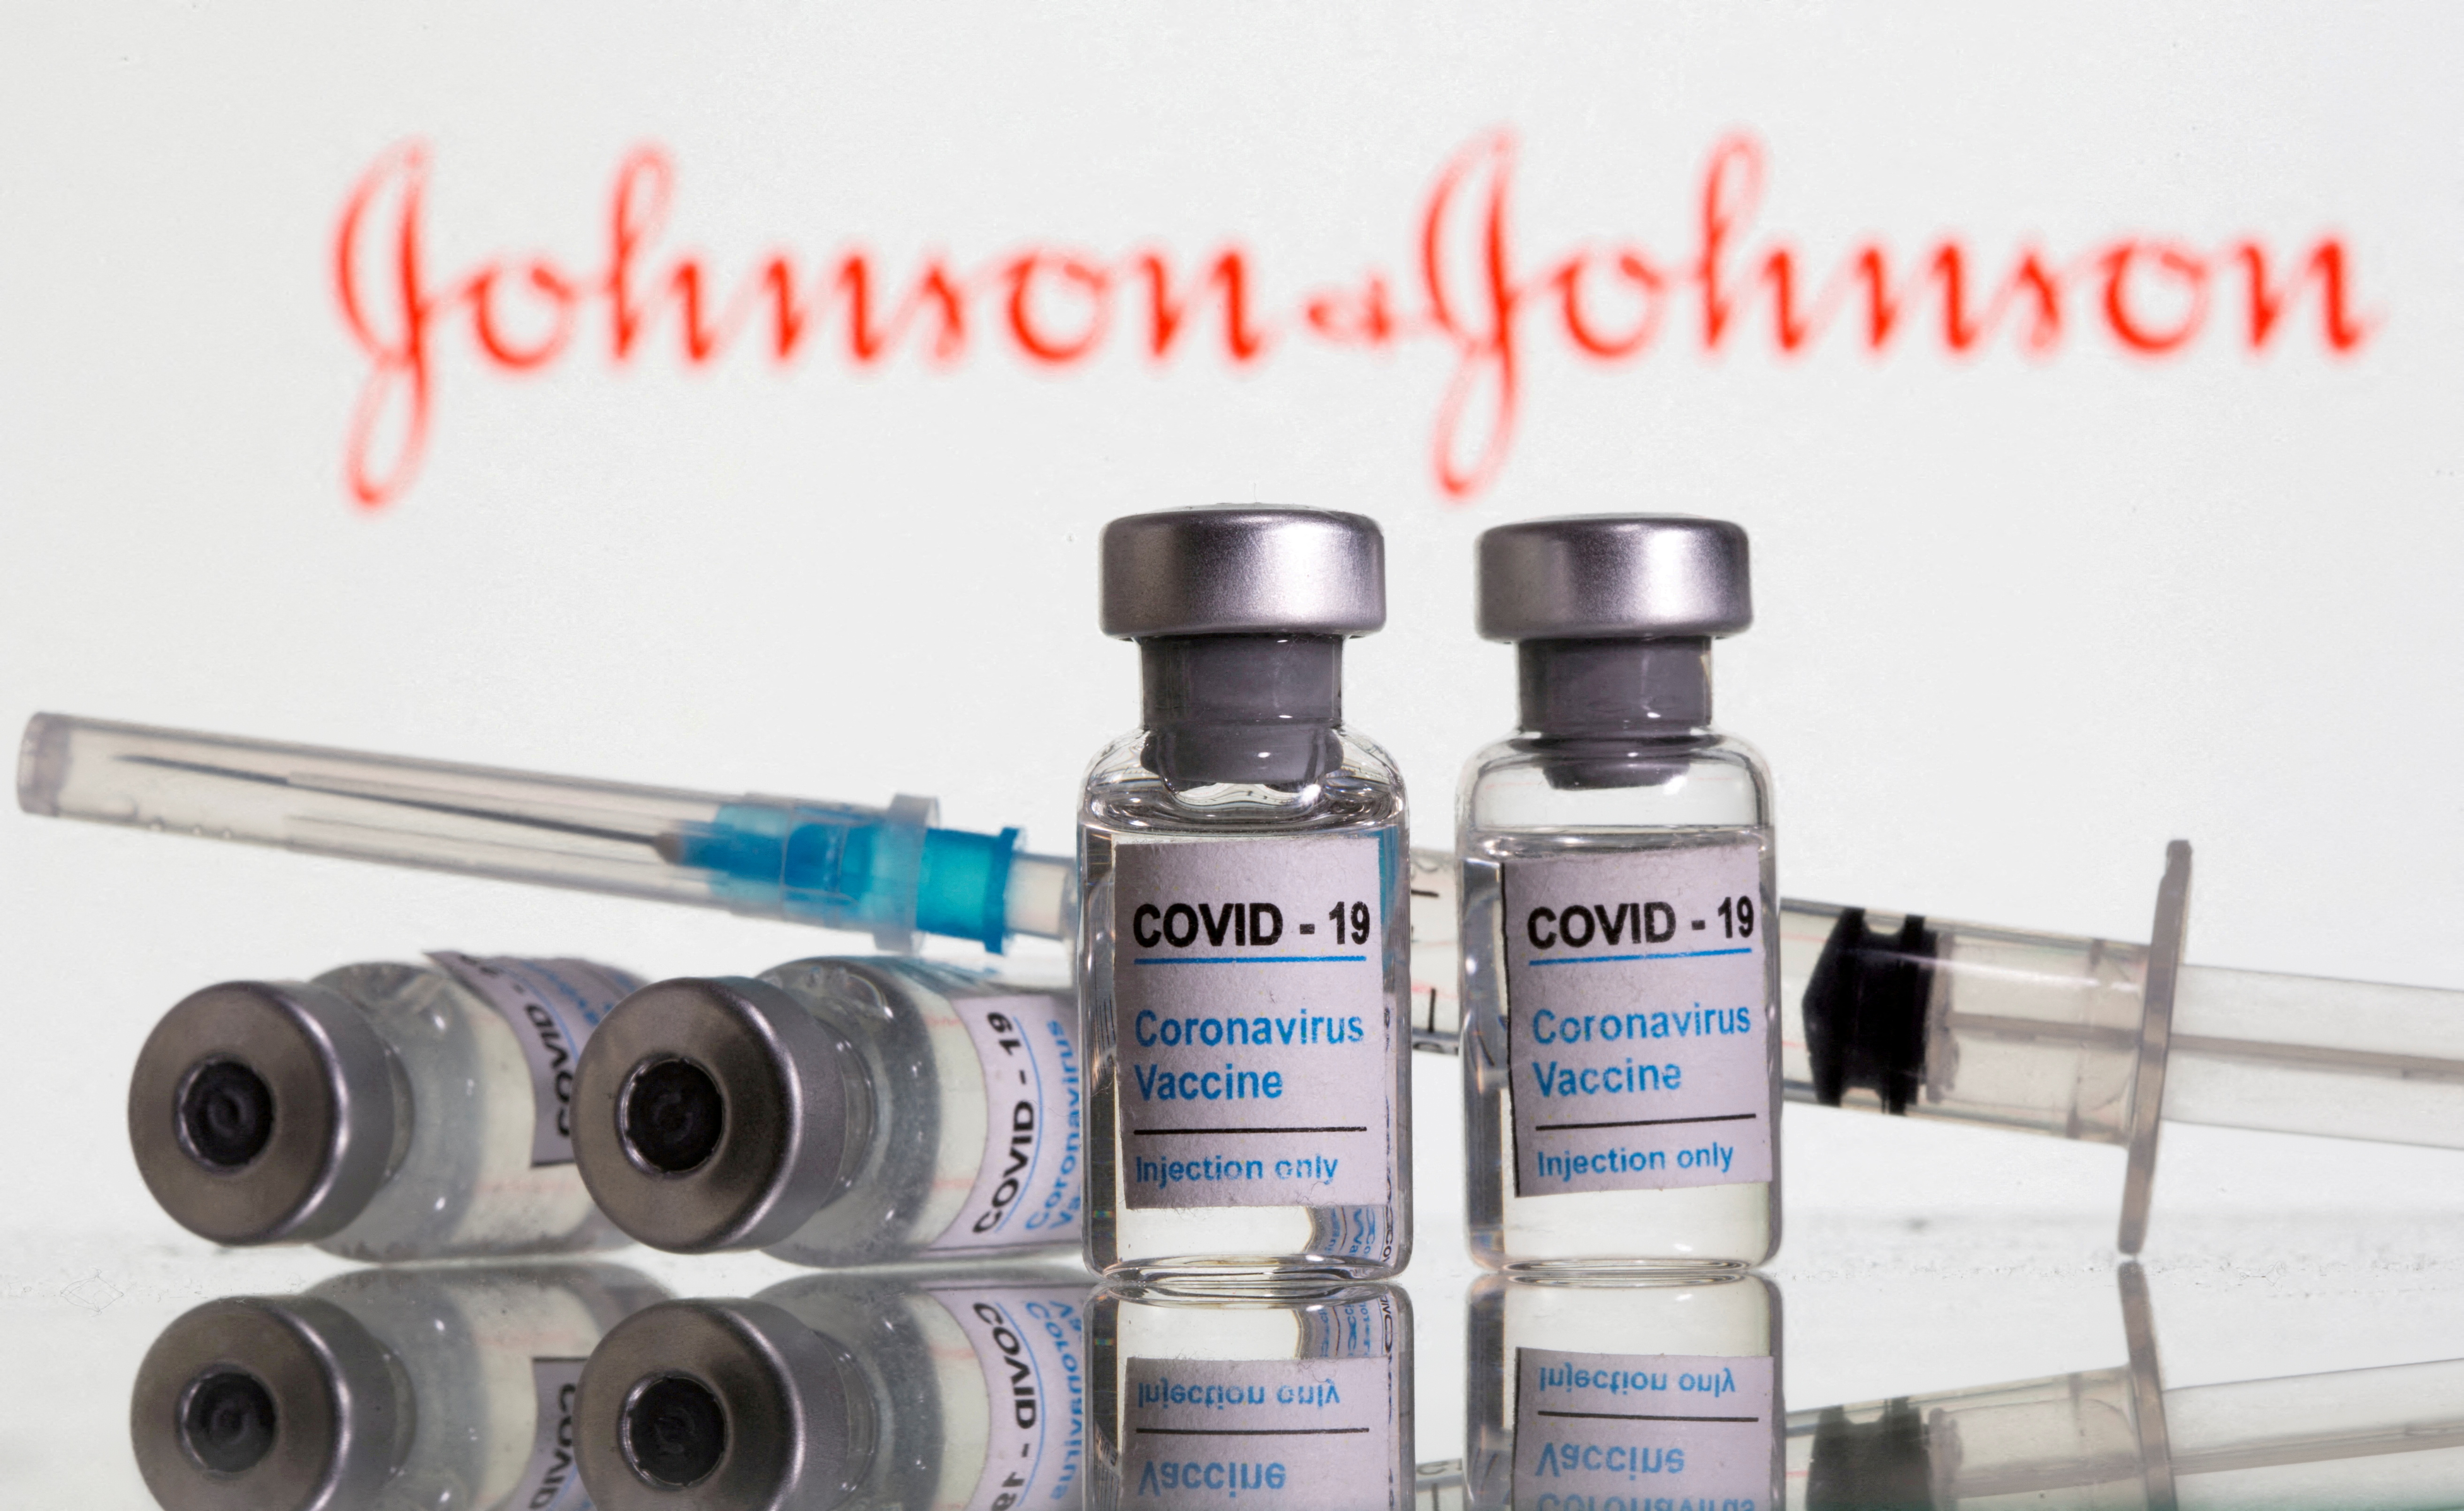 Vials labeled "COVID-19 Coronavirus Vaccine" and syringe are seen in front of displayed Johnson & Johnson logo. REUTERS/Dado Ruvic/Illustration